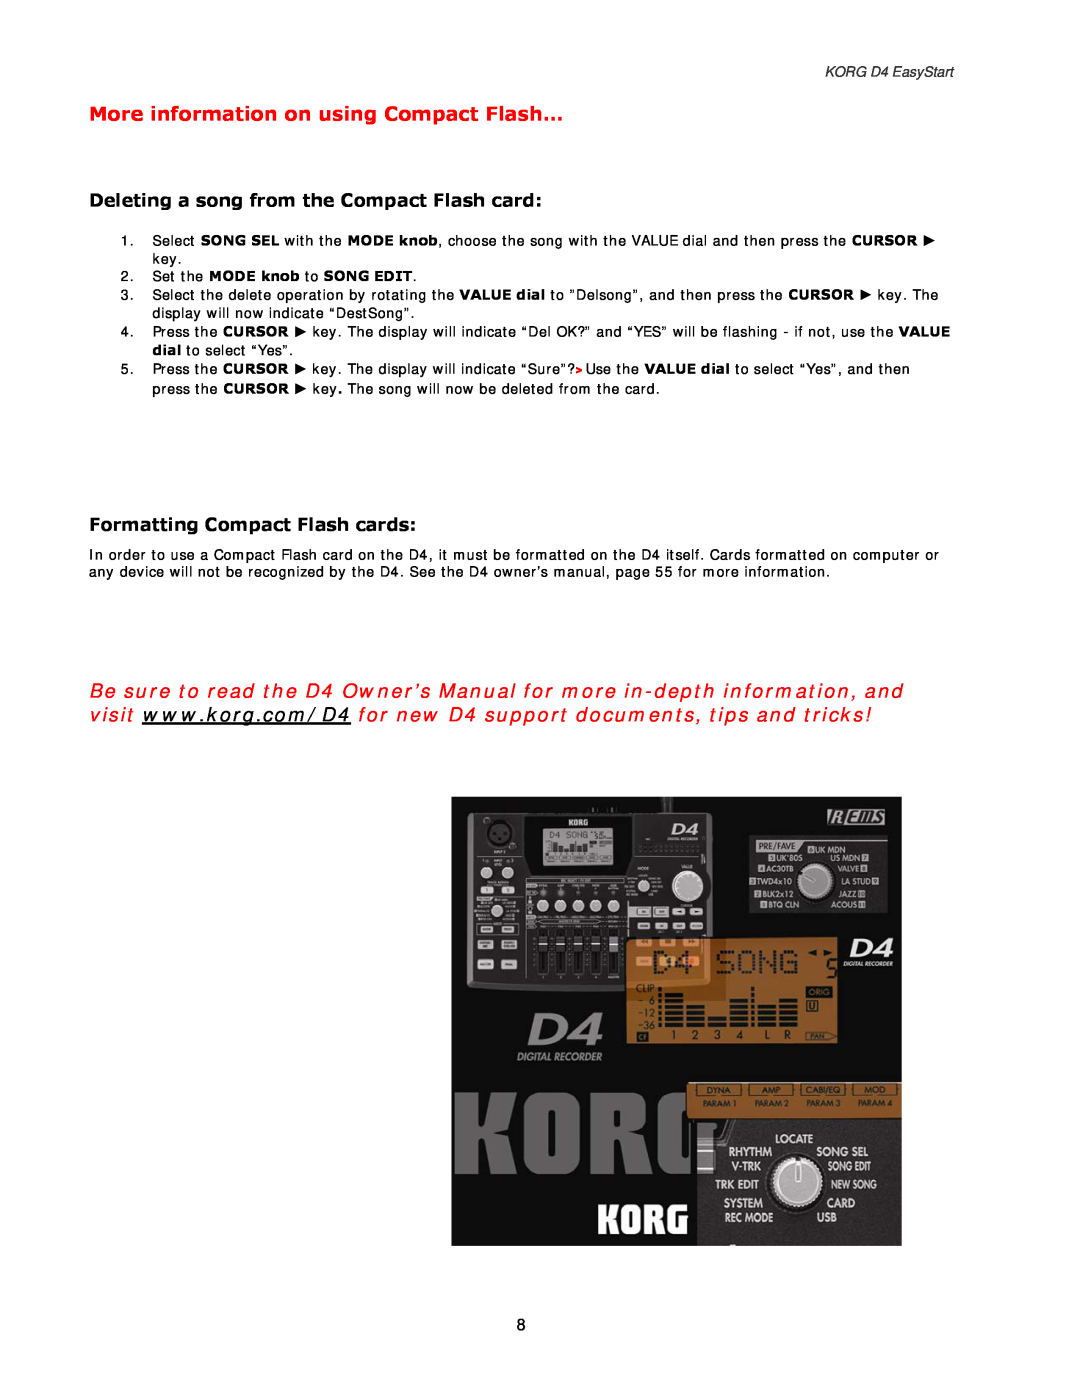 Korg manual More information on using Compact Flash…, Deleting a song from the Compact Flash card, KORG D4 EasyStart 